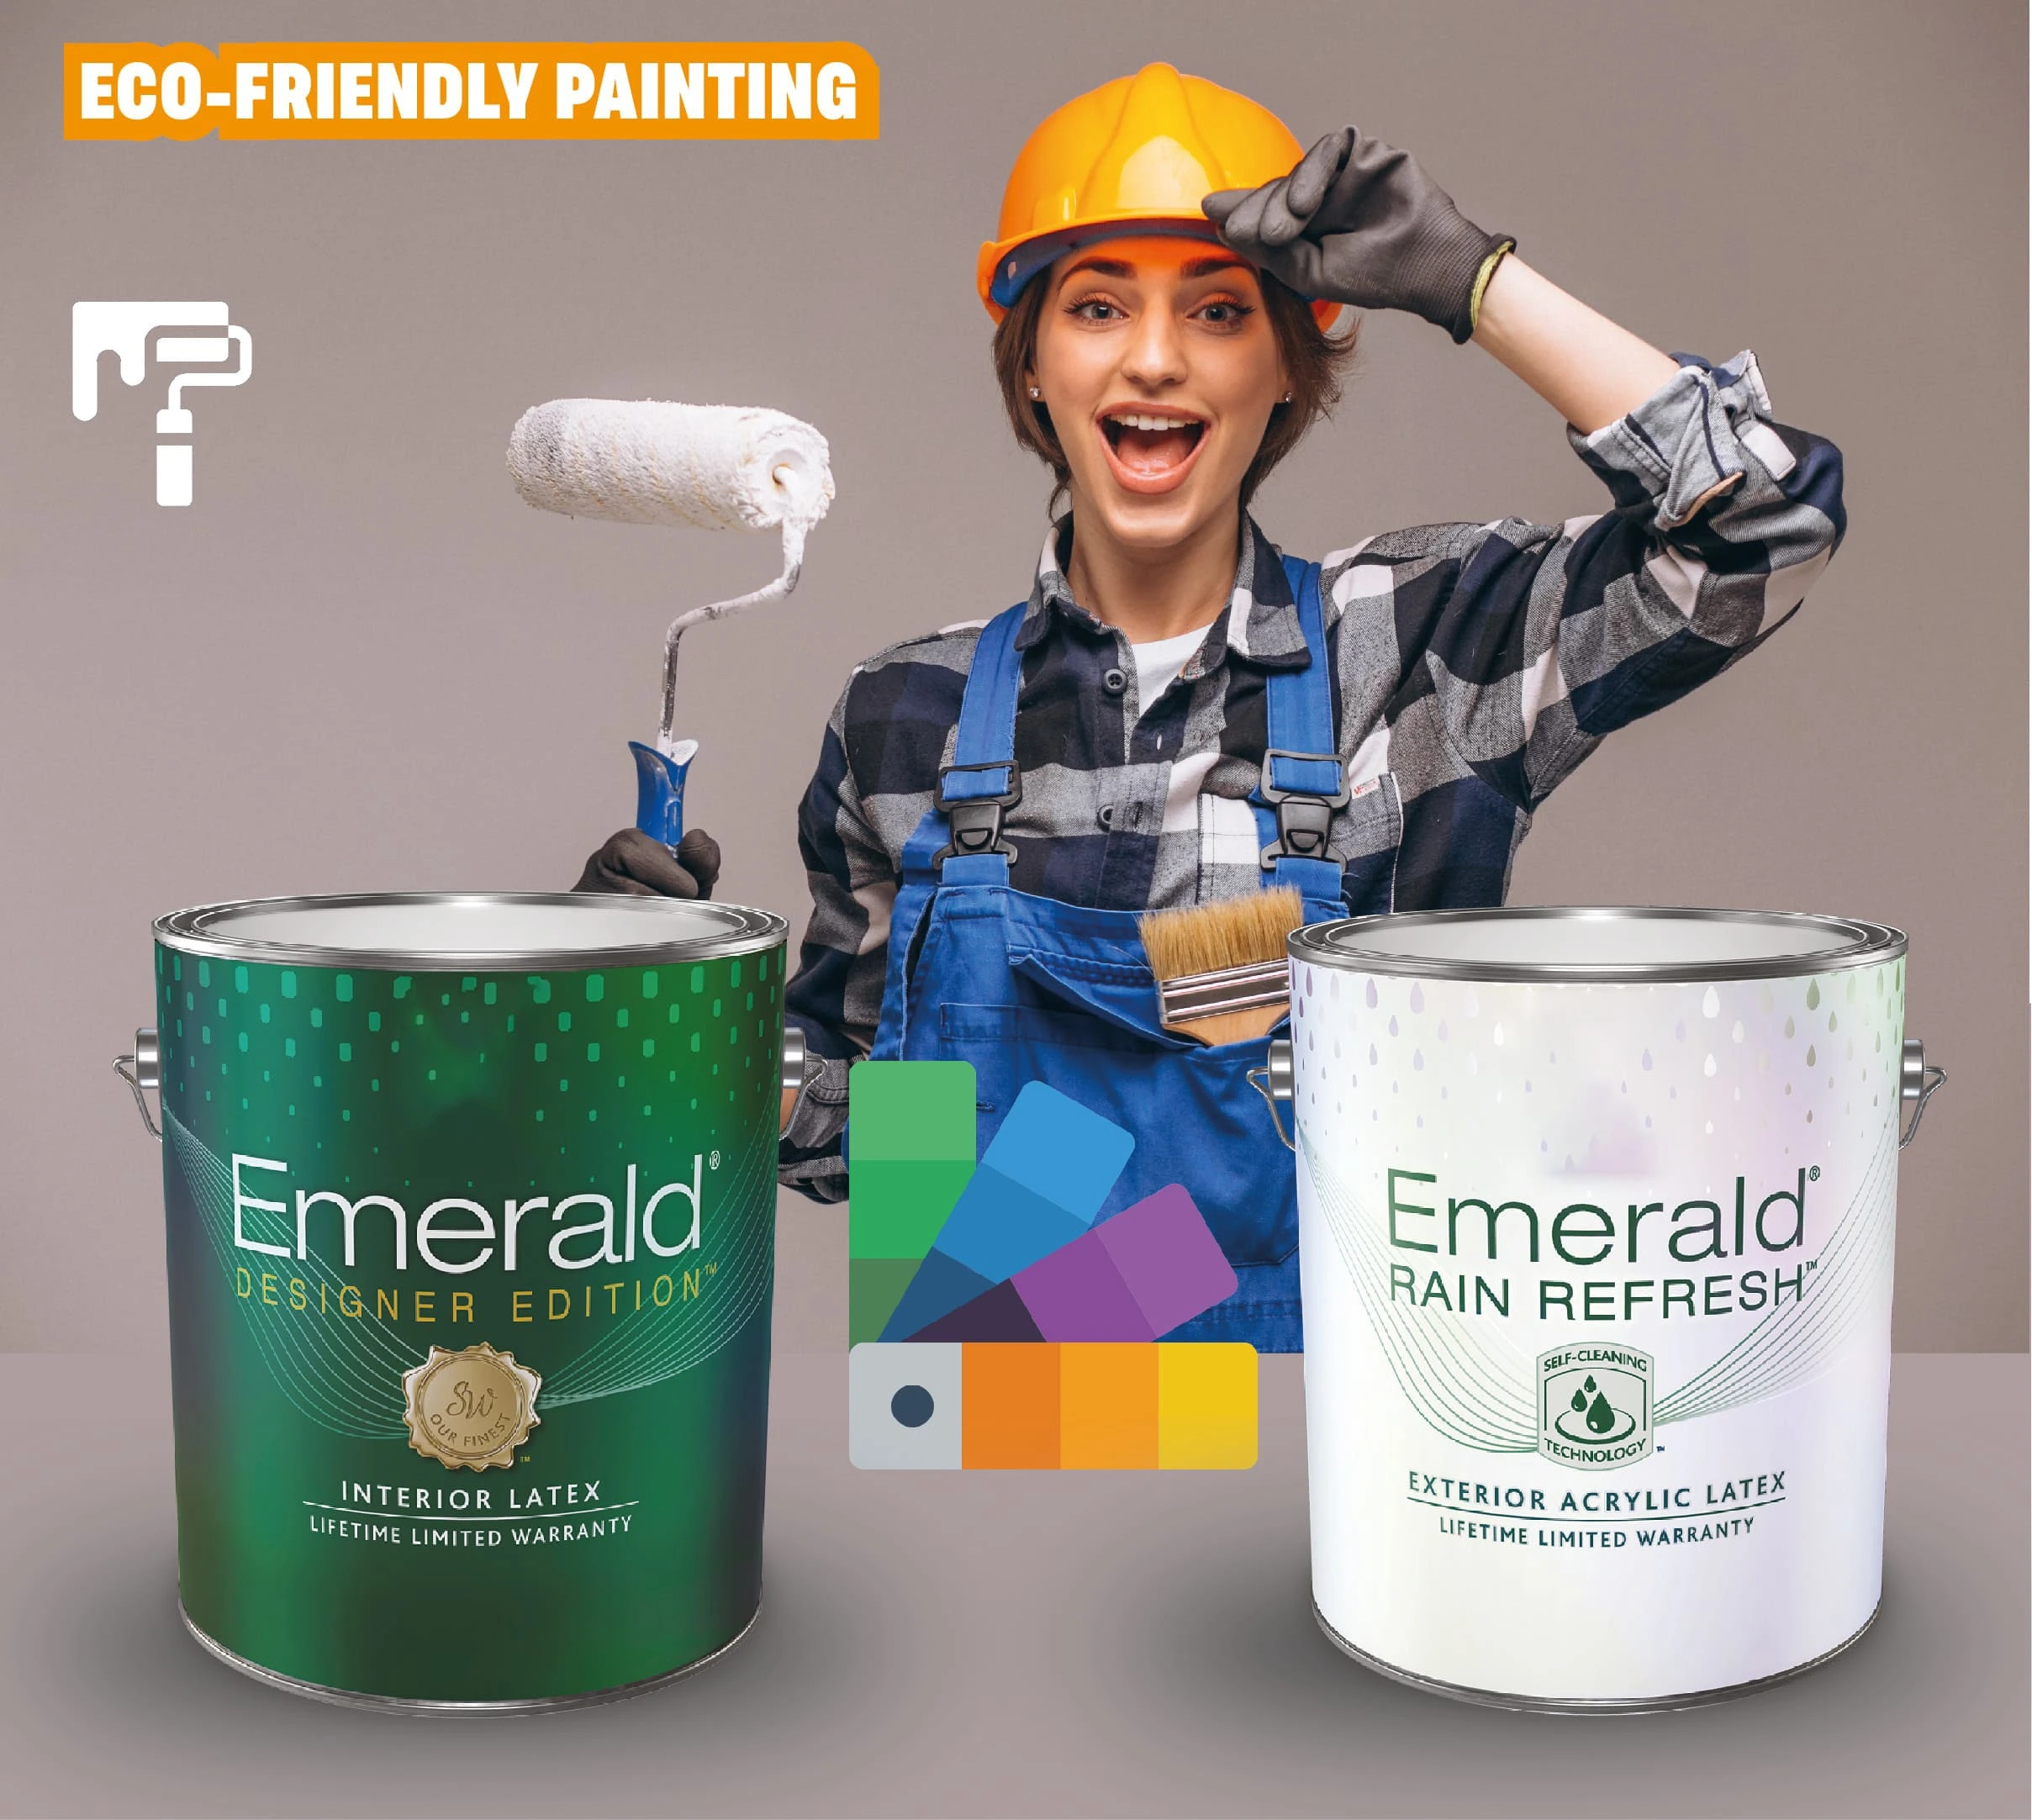 sale of exterior paint, interior paint,
residential painting,
commercial paints.